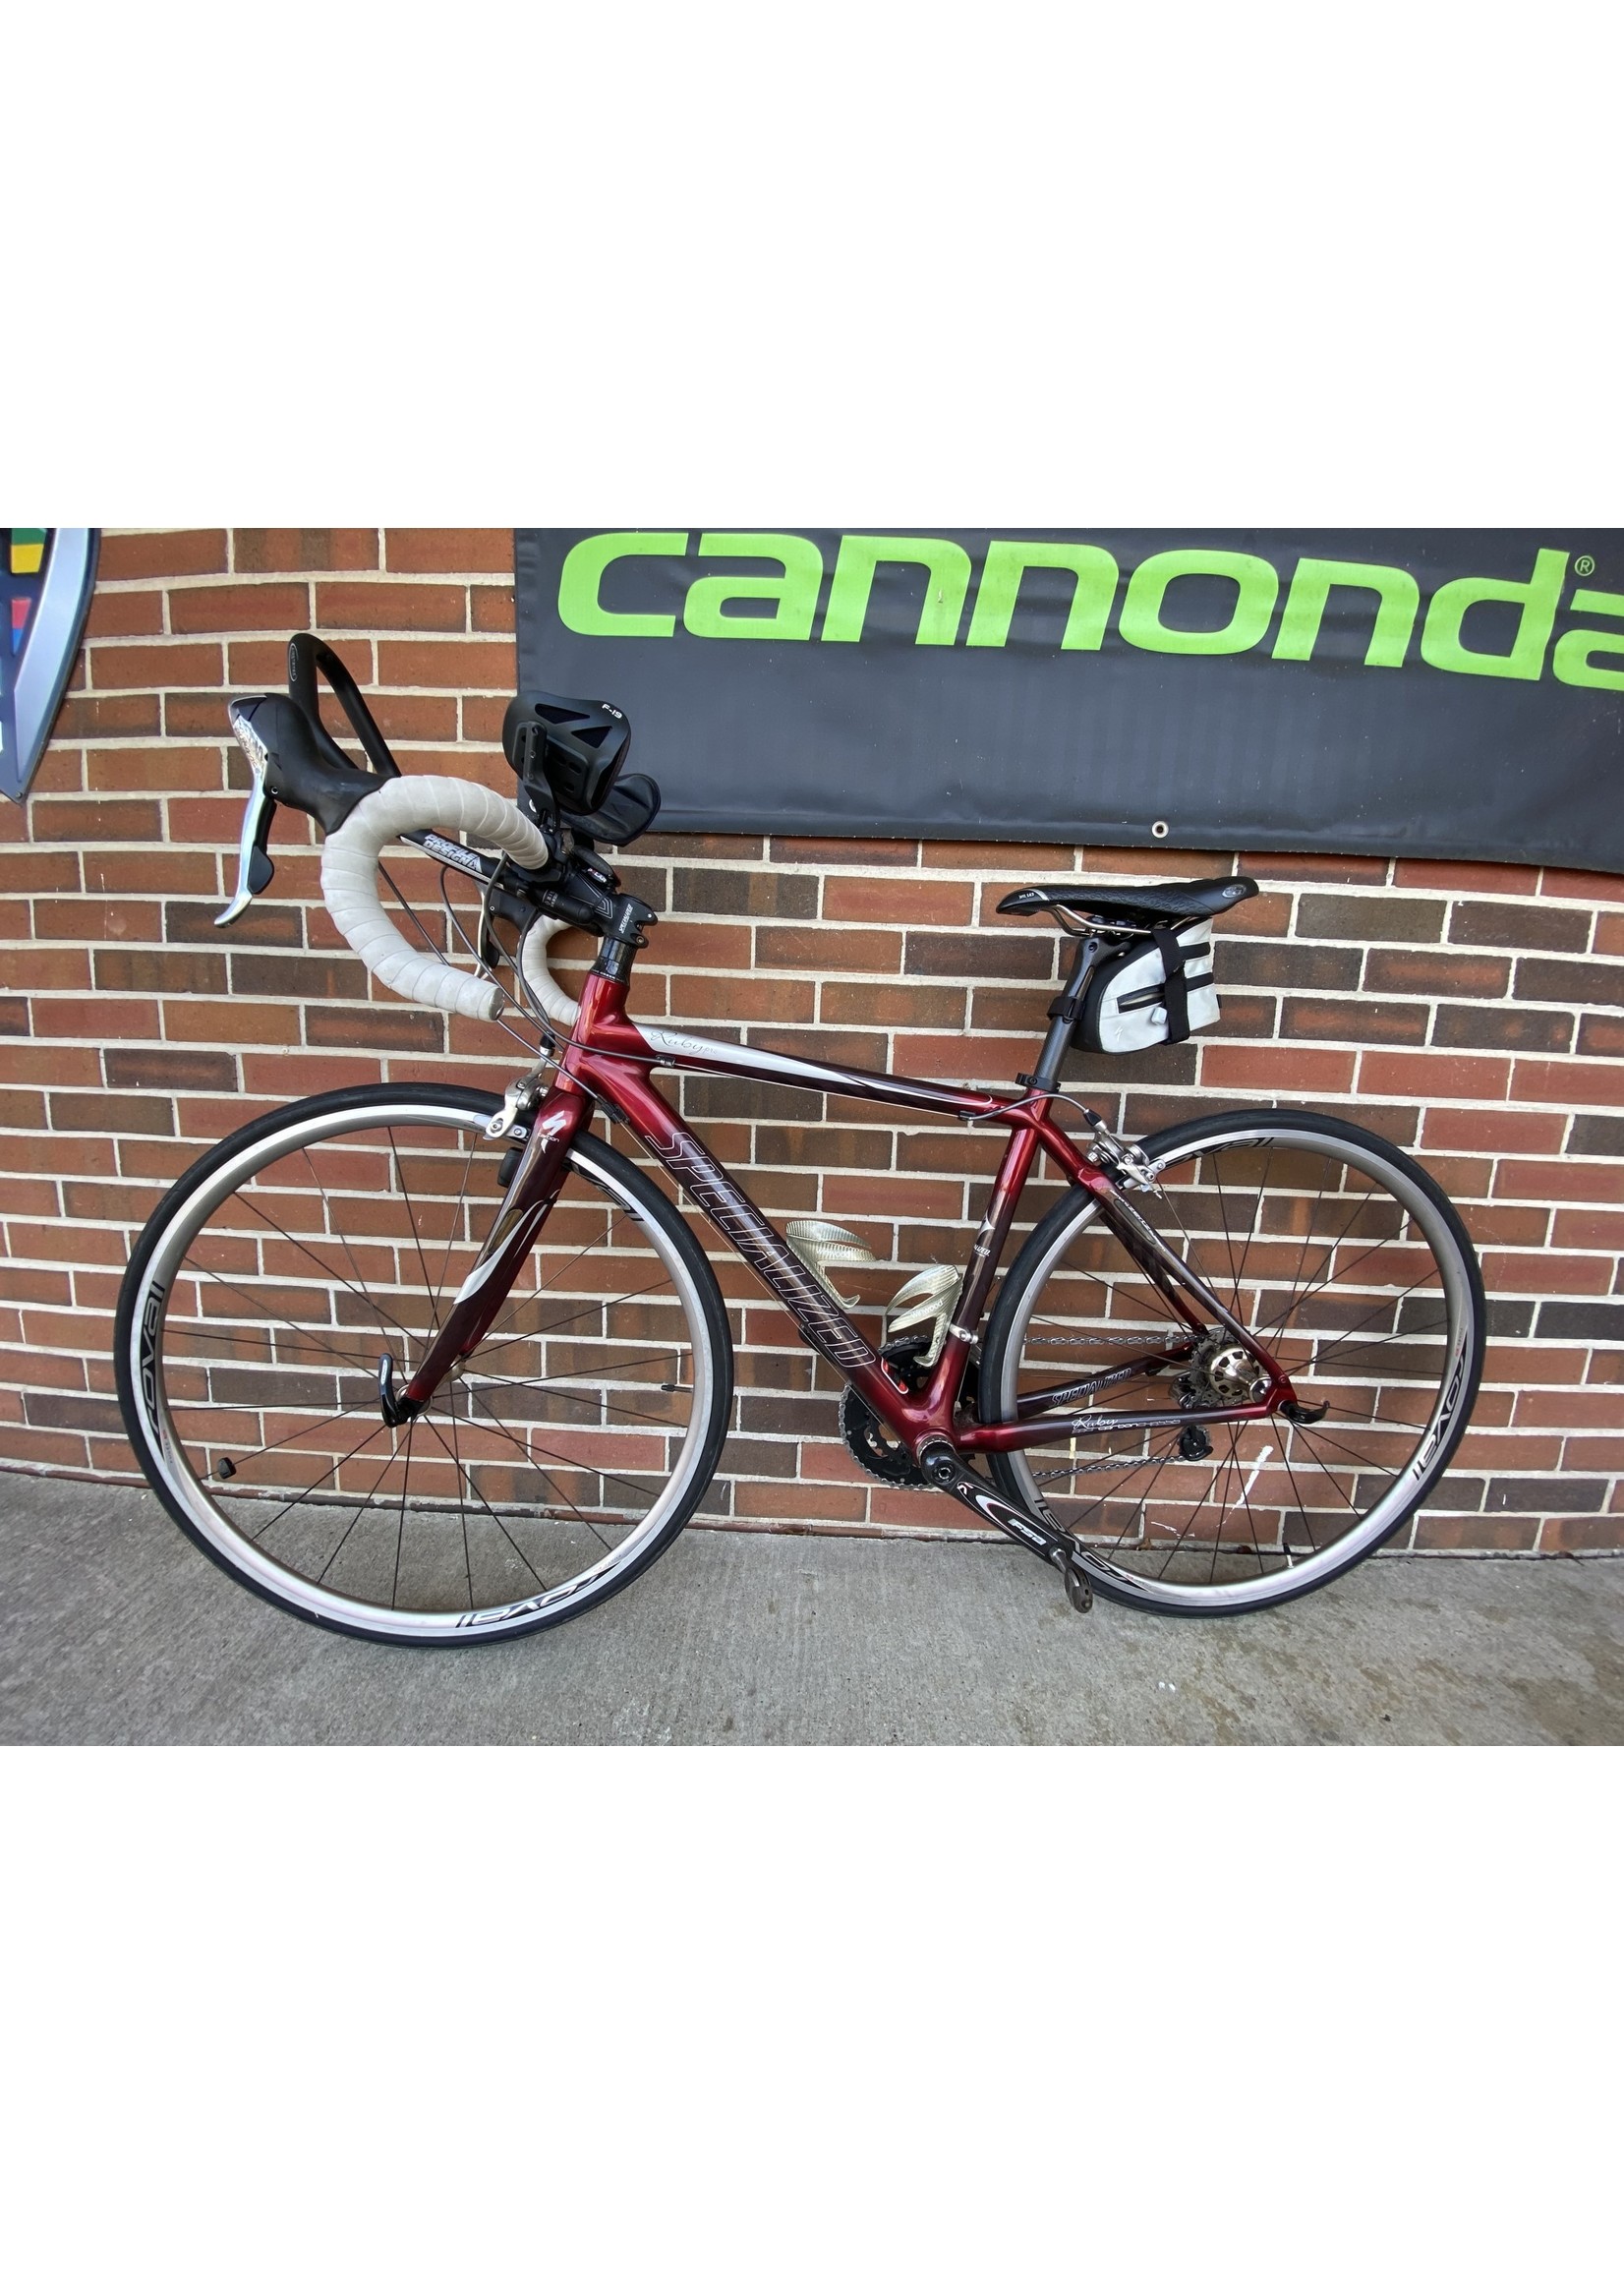 USED Used Specialized Ruby Pro Carbon 51cm w/ aero bars